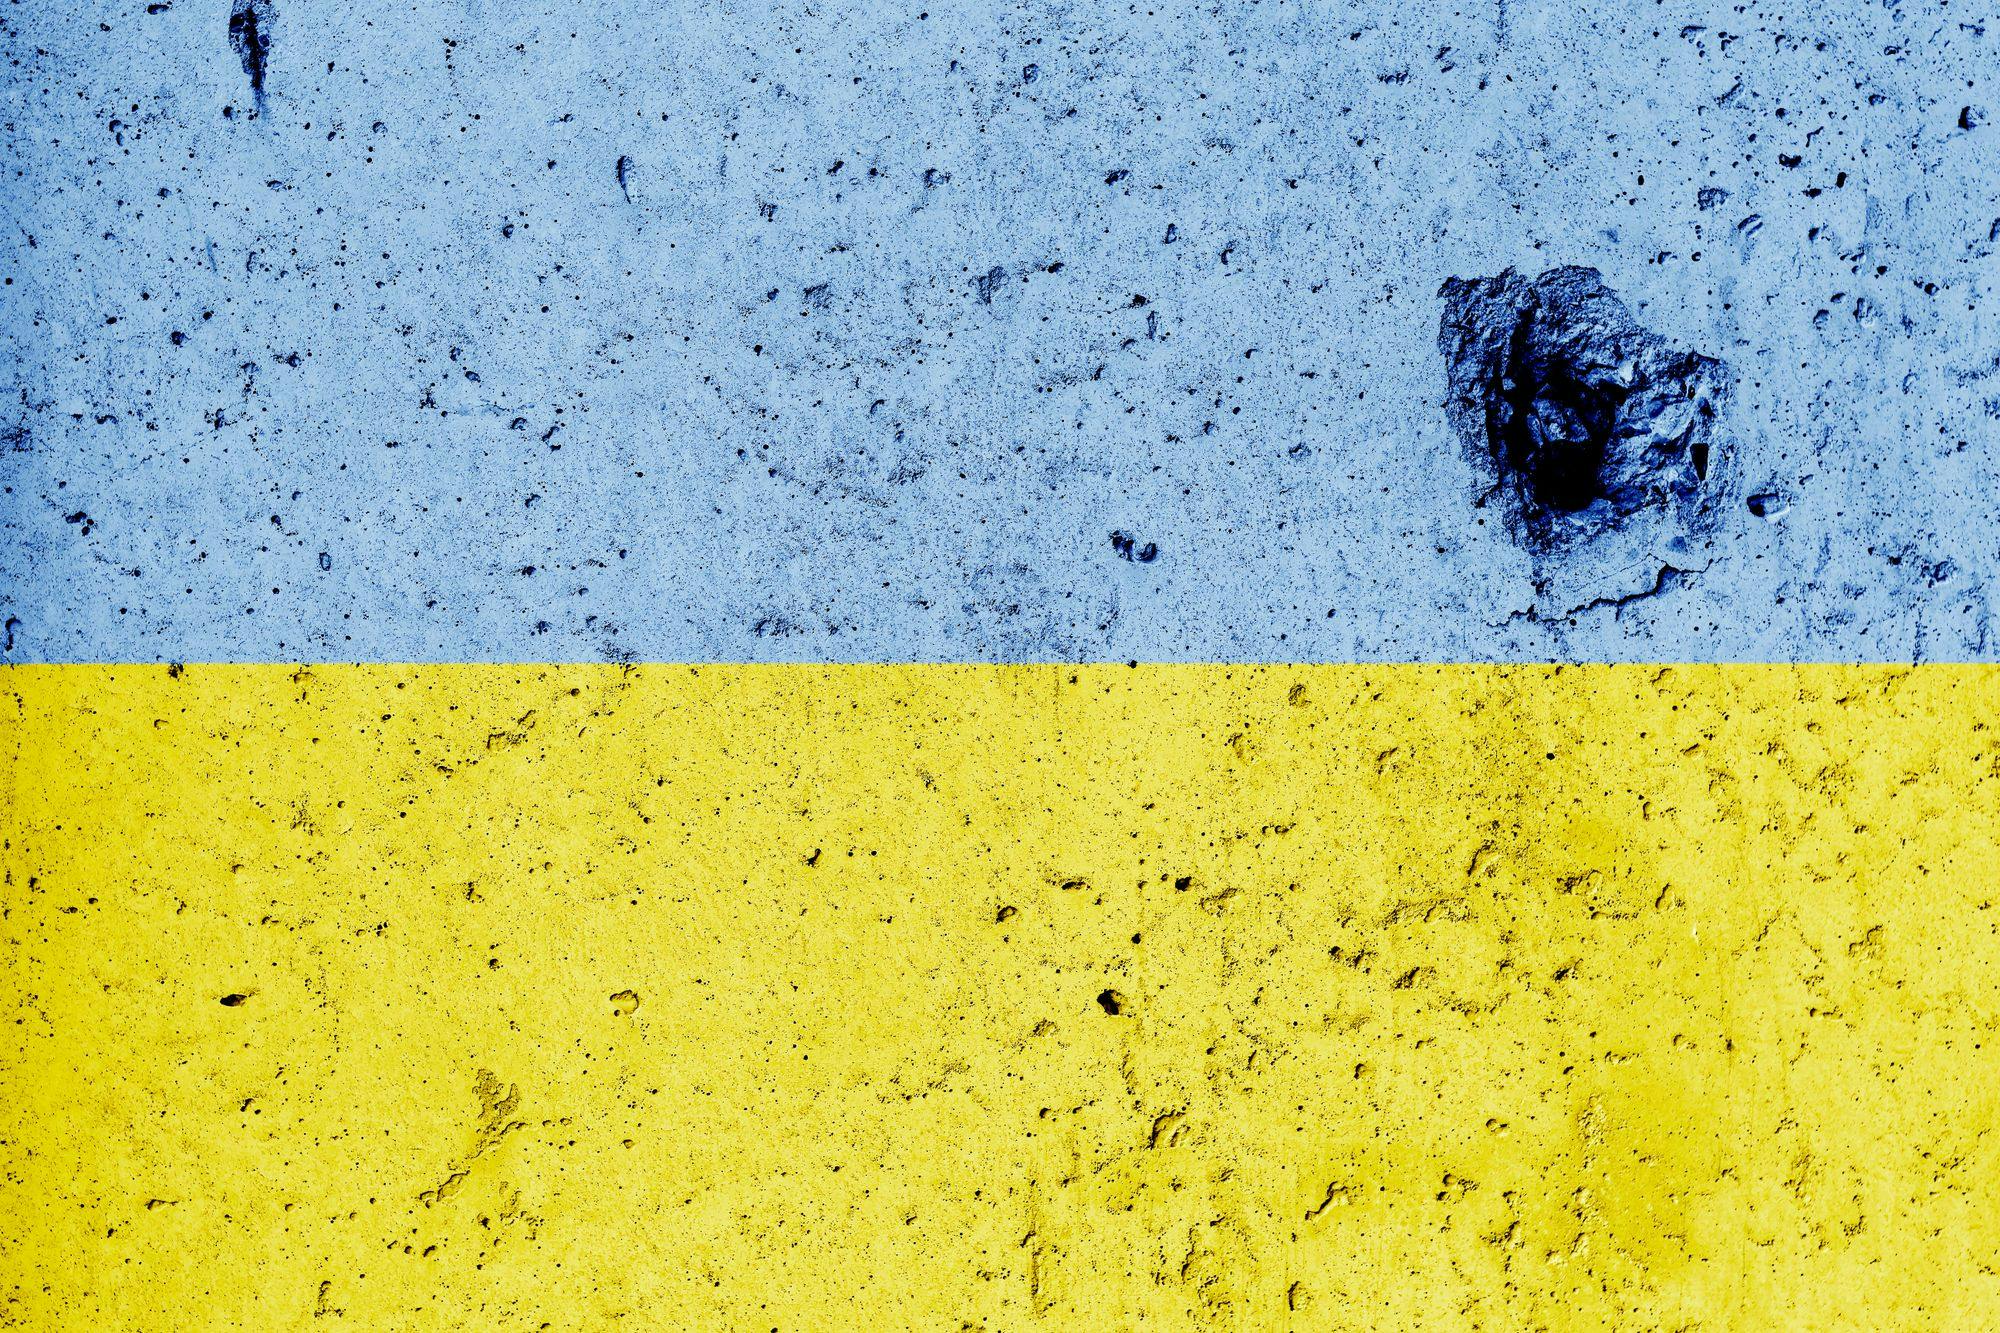 The Russian Invasion of Ukraine: Sanctions, Cryptocurrency, and the Role of Neutral Money